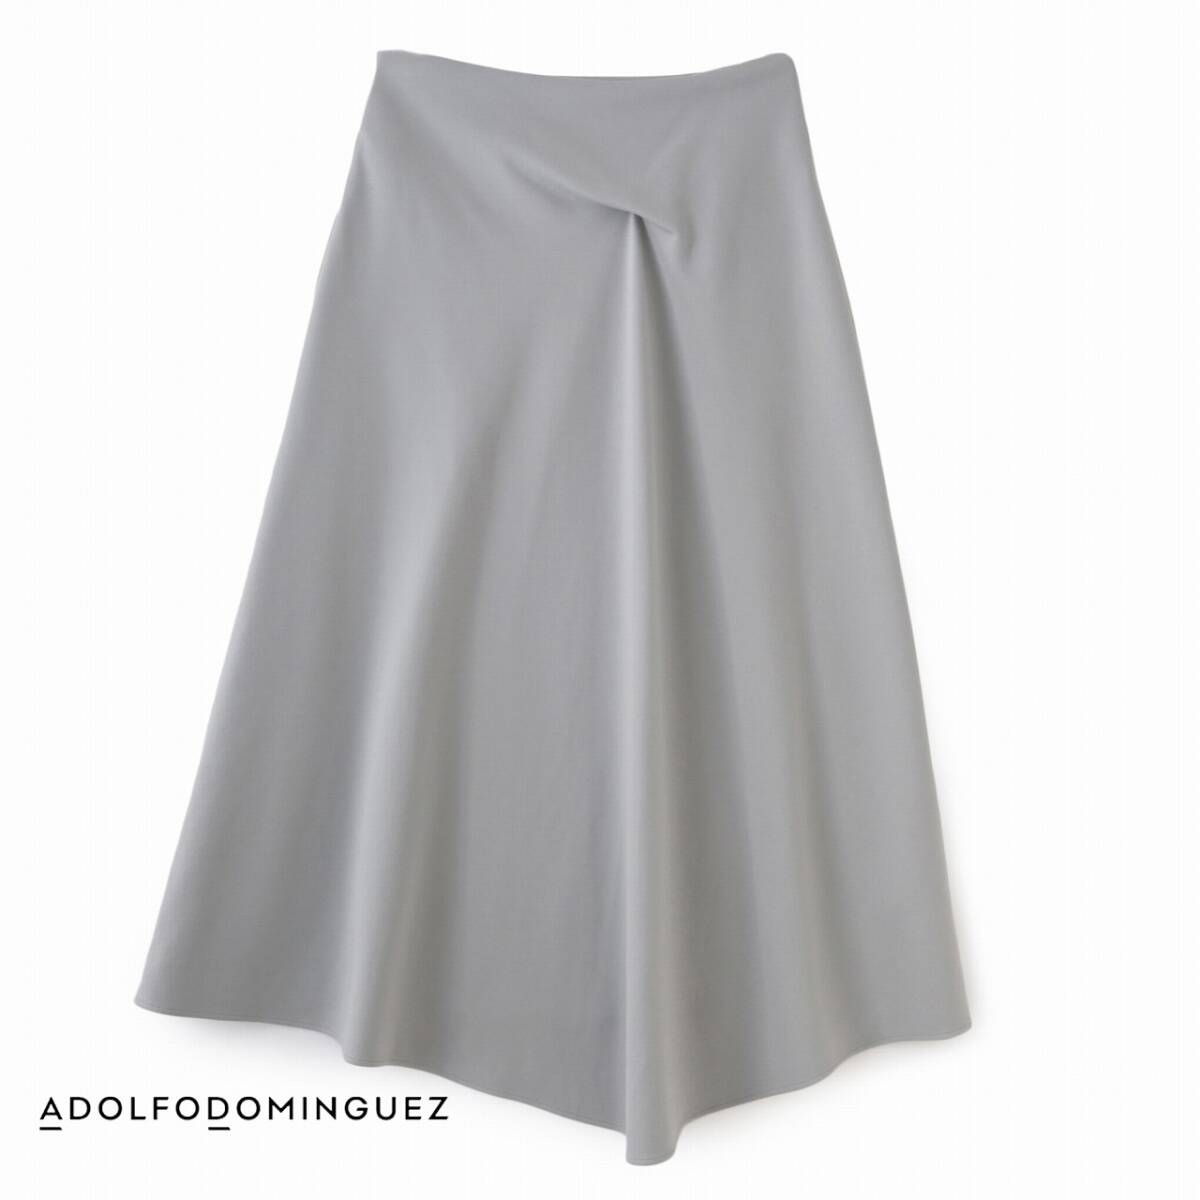  beautiful goods *a dollar fodomin Guess *Msize/11 number * skirt Z048